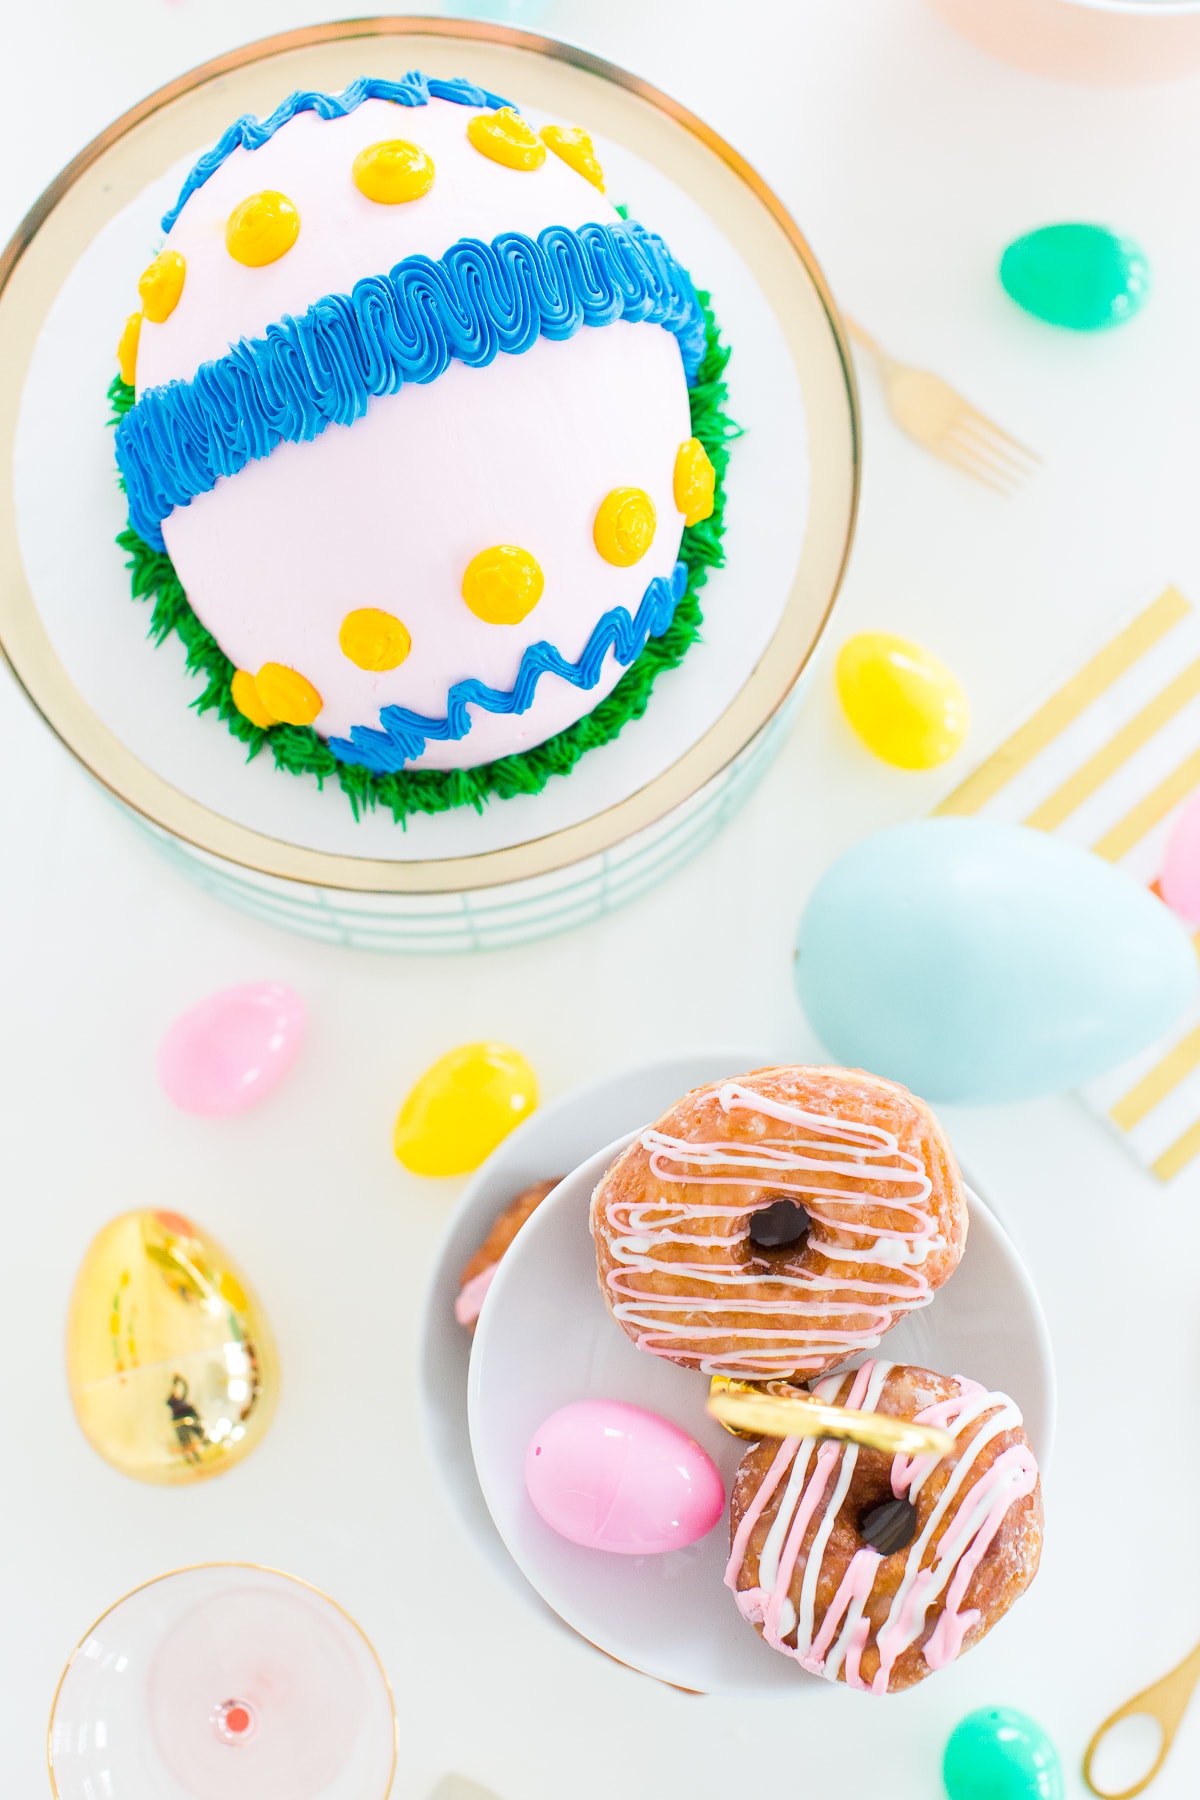 A playful Easter dessert table - sugar and cloth